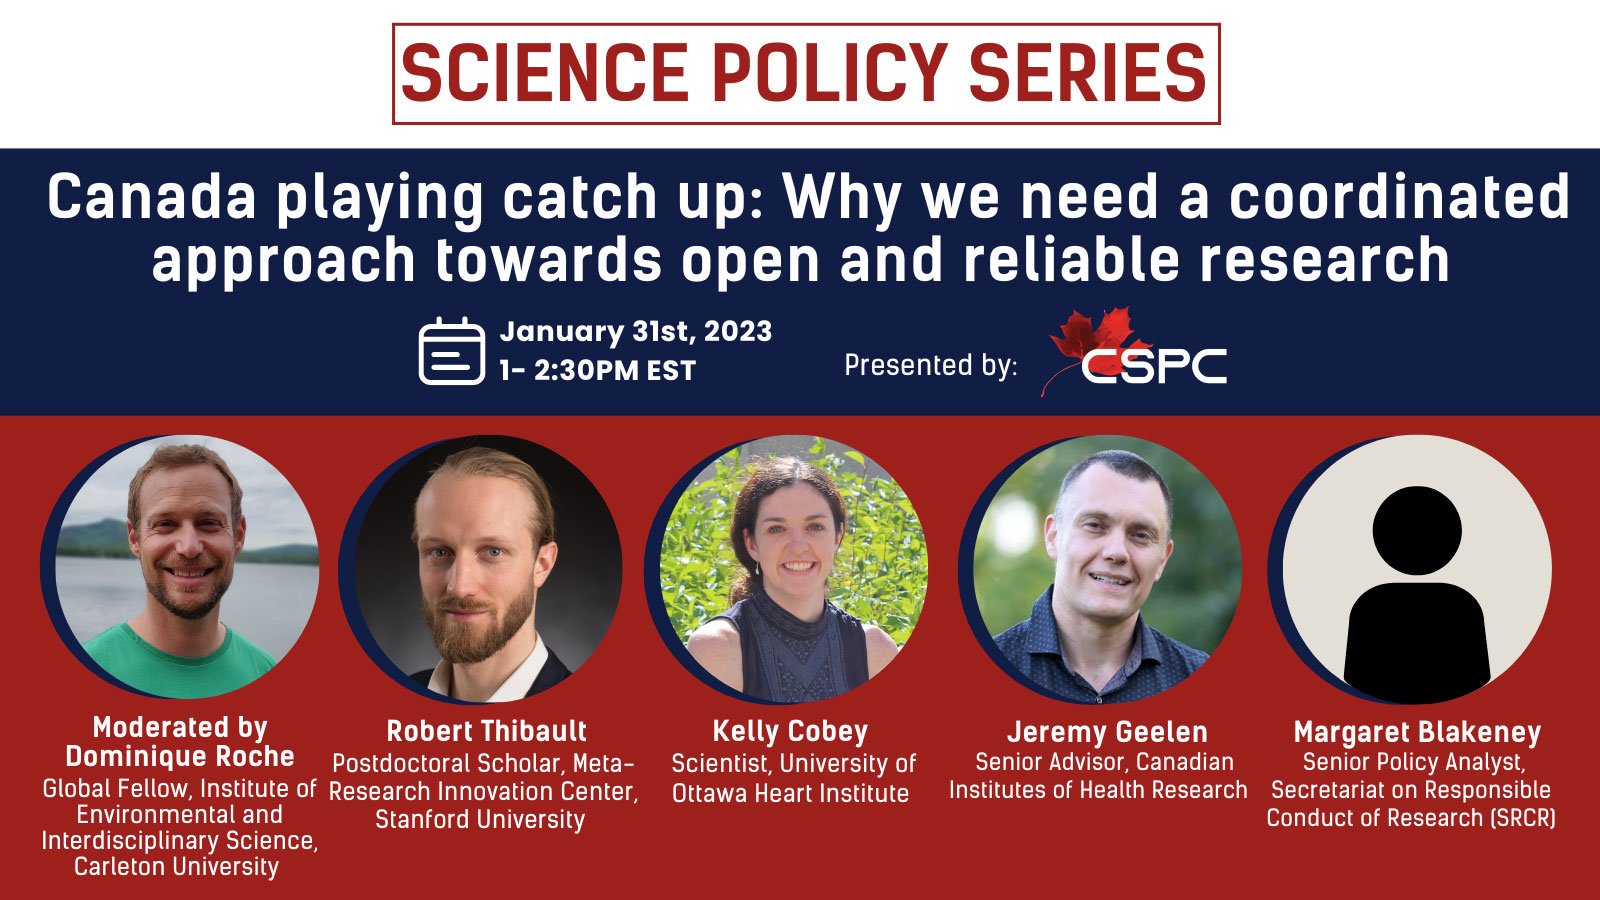 Banner for event titled "Canada playing catch up: Why we need a coordinated approach towards open and reliable research"